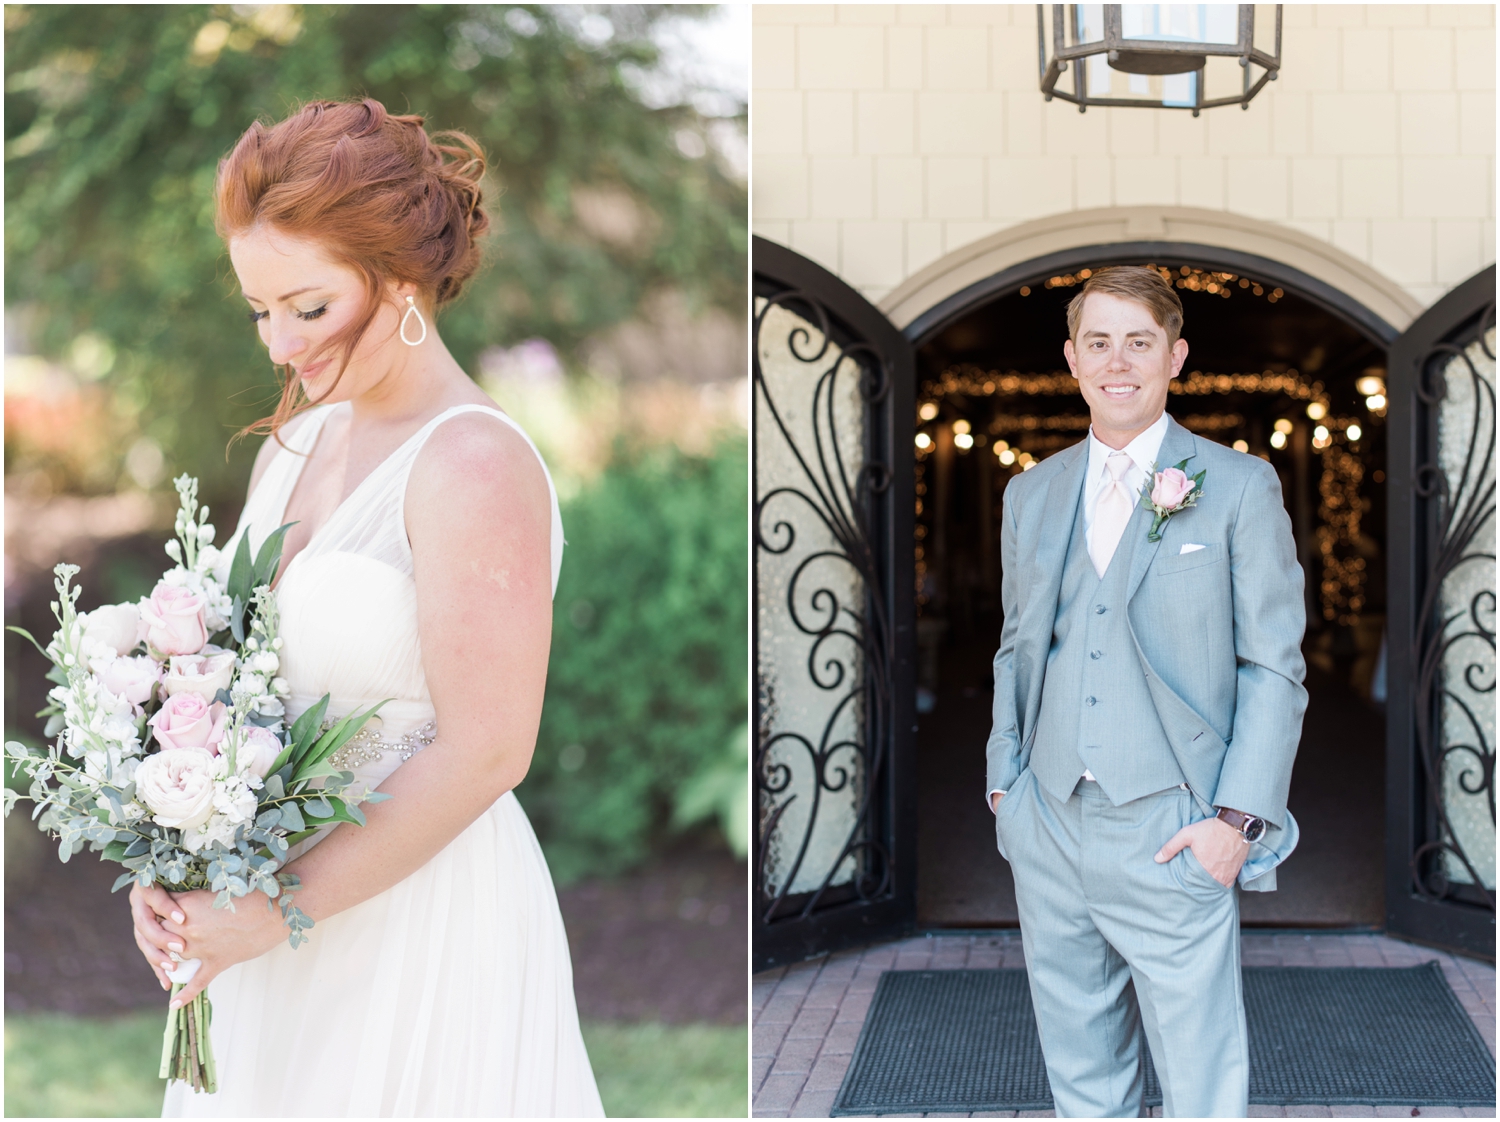 Lord hill Farms wedding in Snohomish